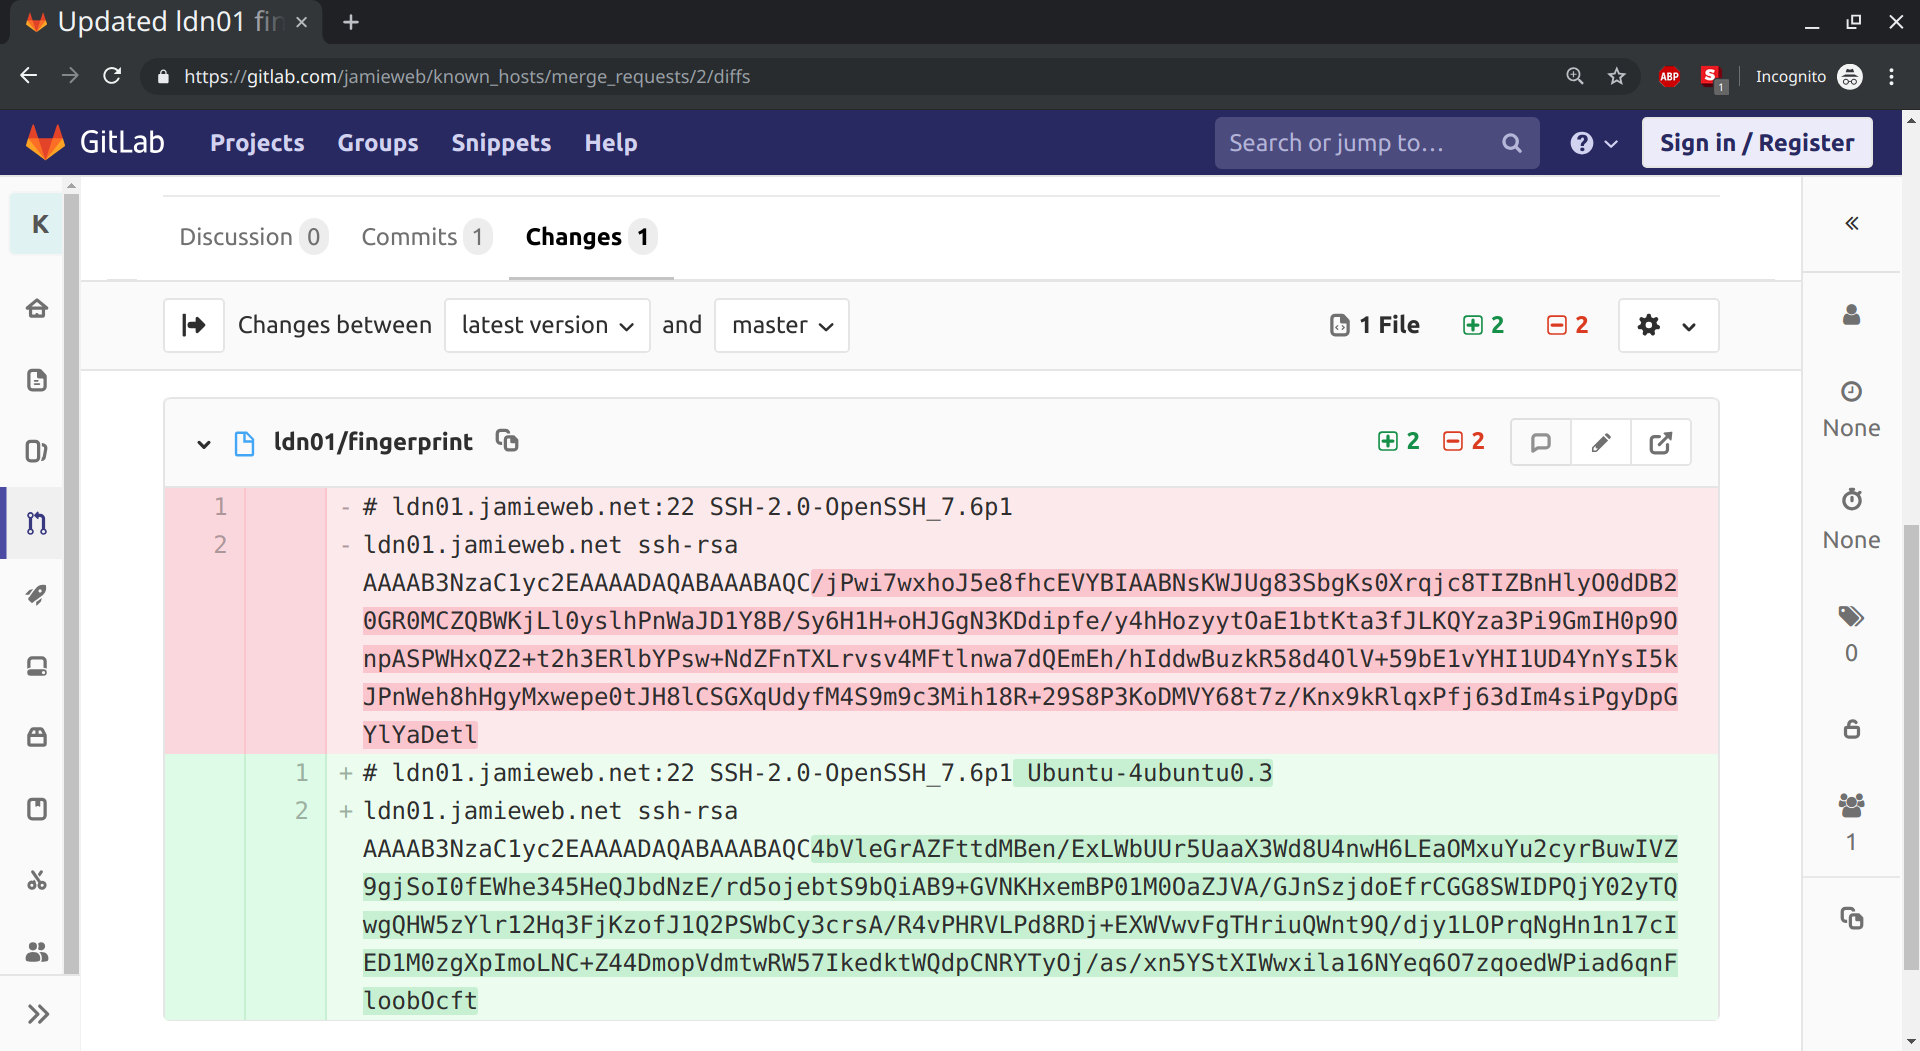 A screenshot of the merge request diff within GitLab.